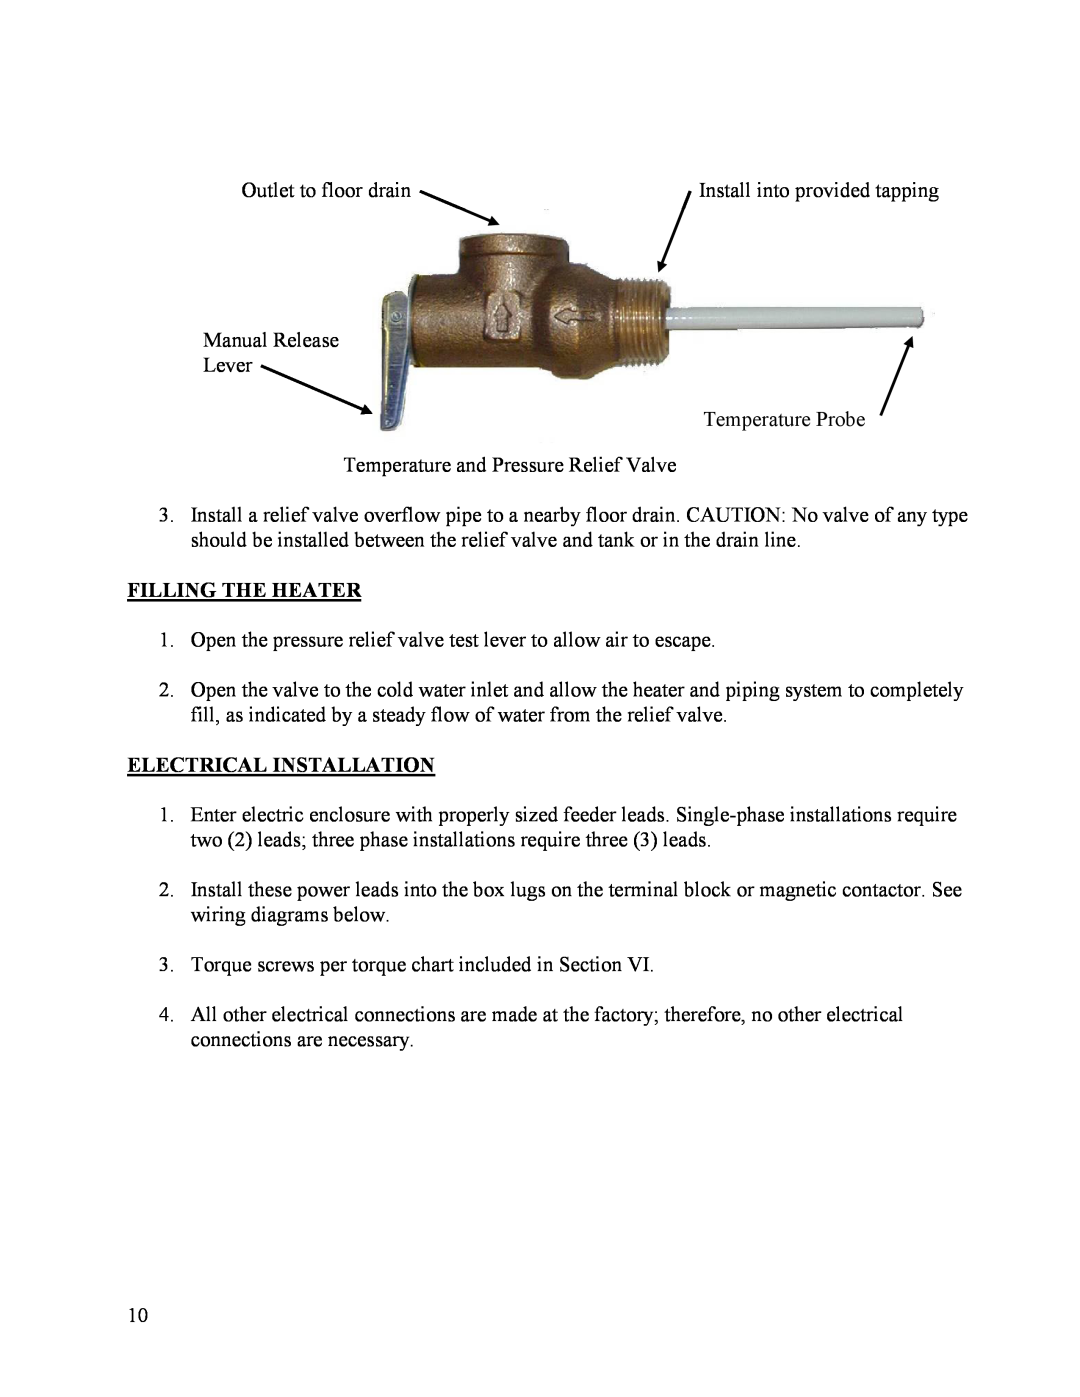 Hubbell Electric Heater Company D manual Filling The Heater, Electrical Installation 